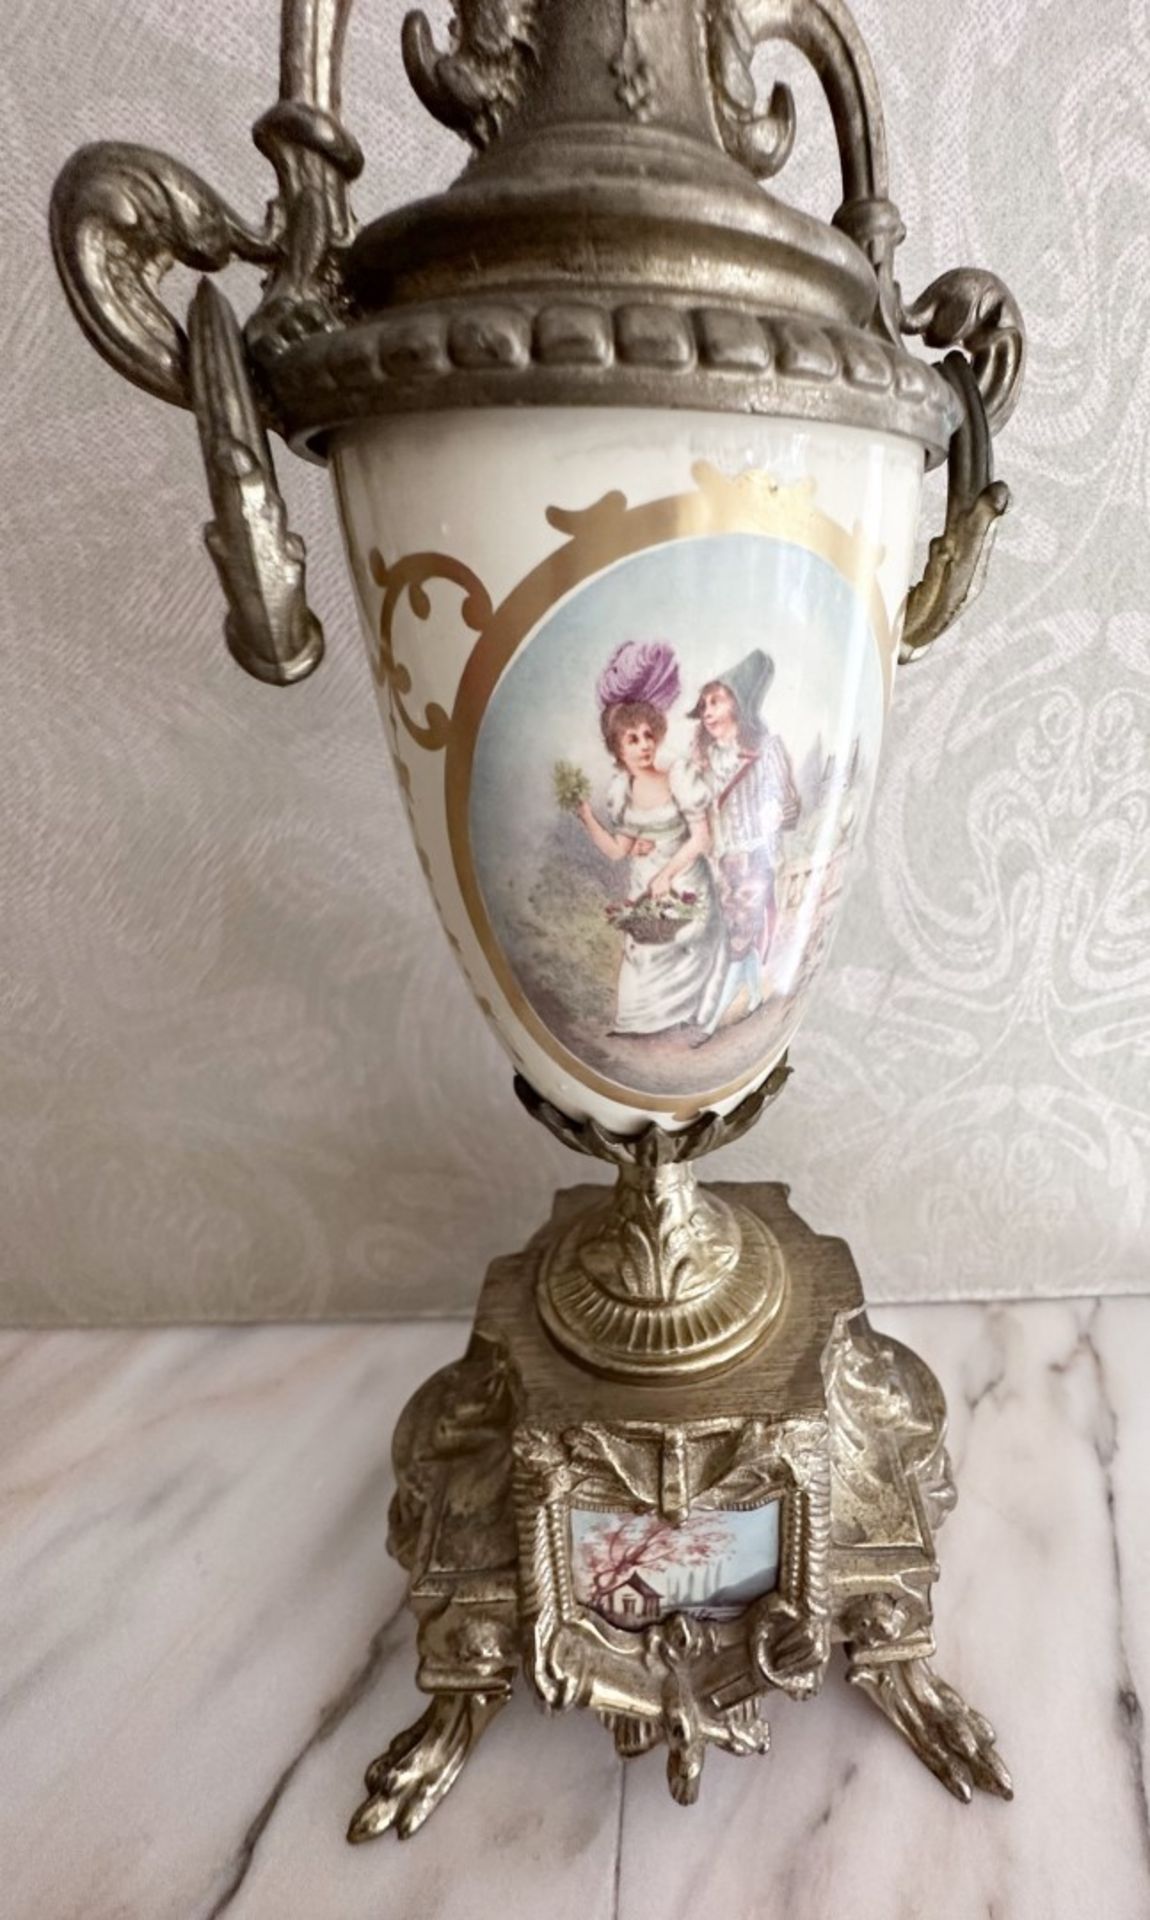 1 x Porcelain And Brass FRENCH SEVRES Vase/Jar. Hand Painted With Gold Leaf Design - Image 6 of 7